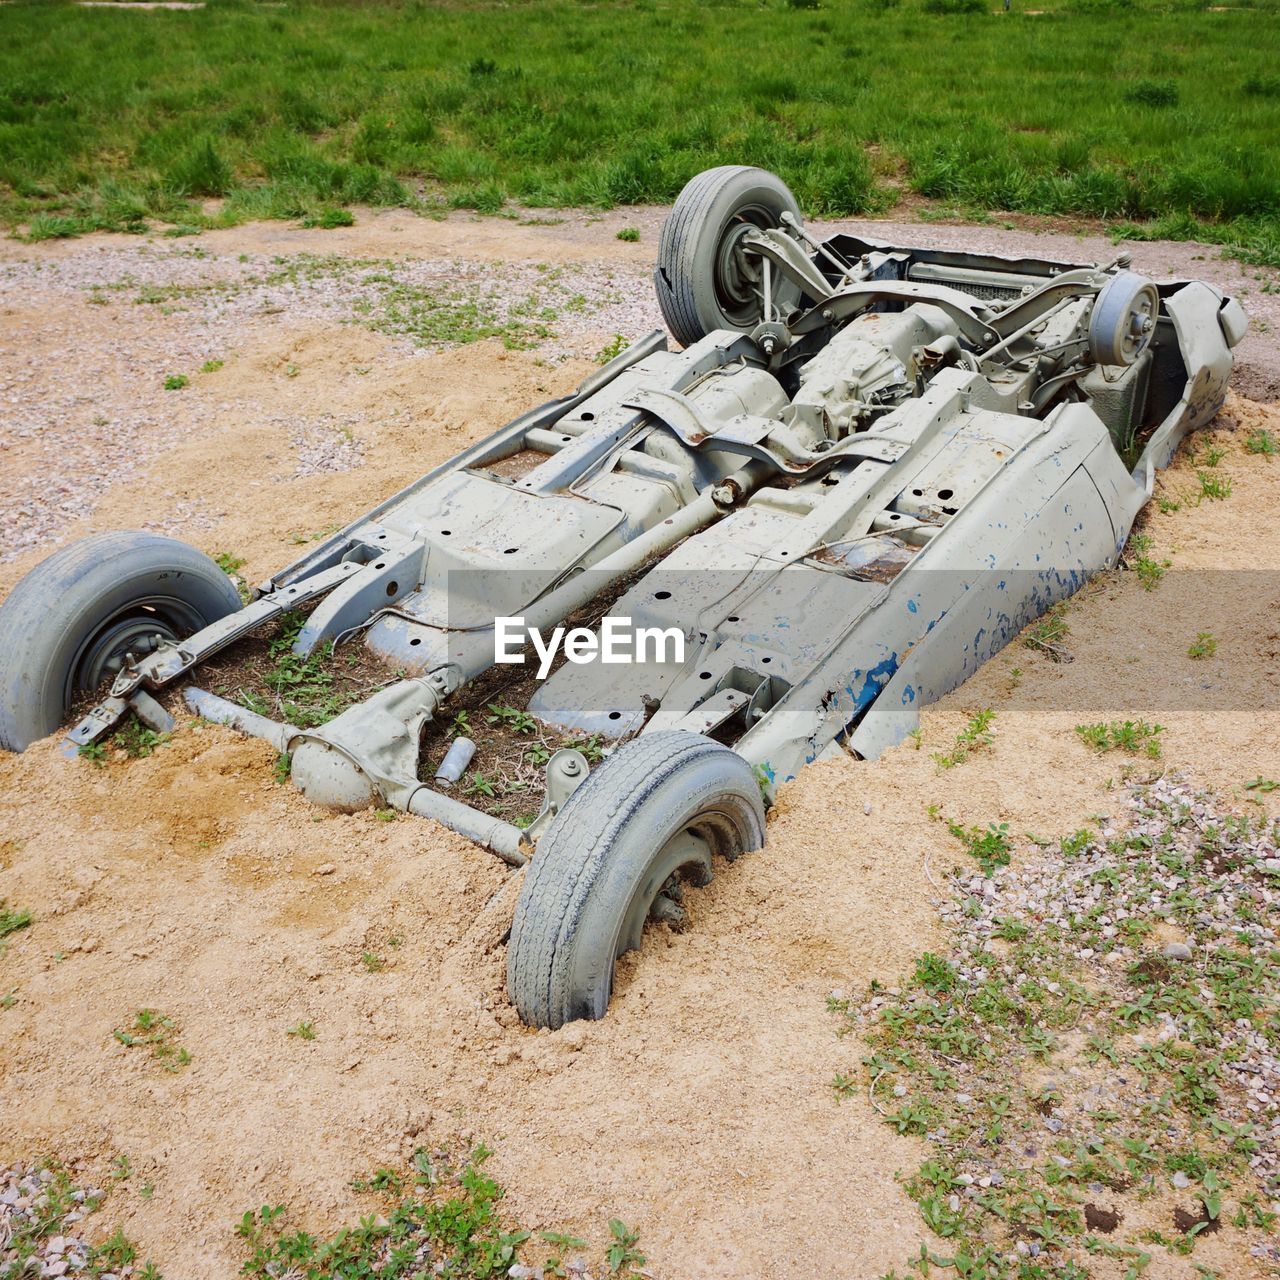 Abandoned upside down car half buried in sand